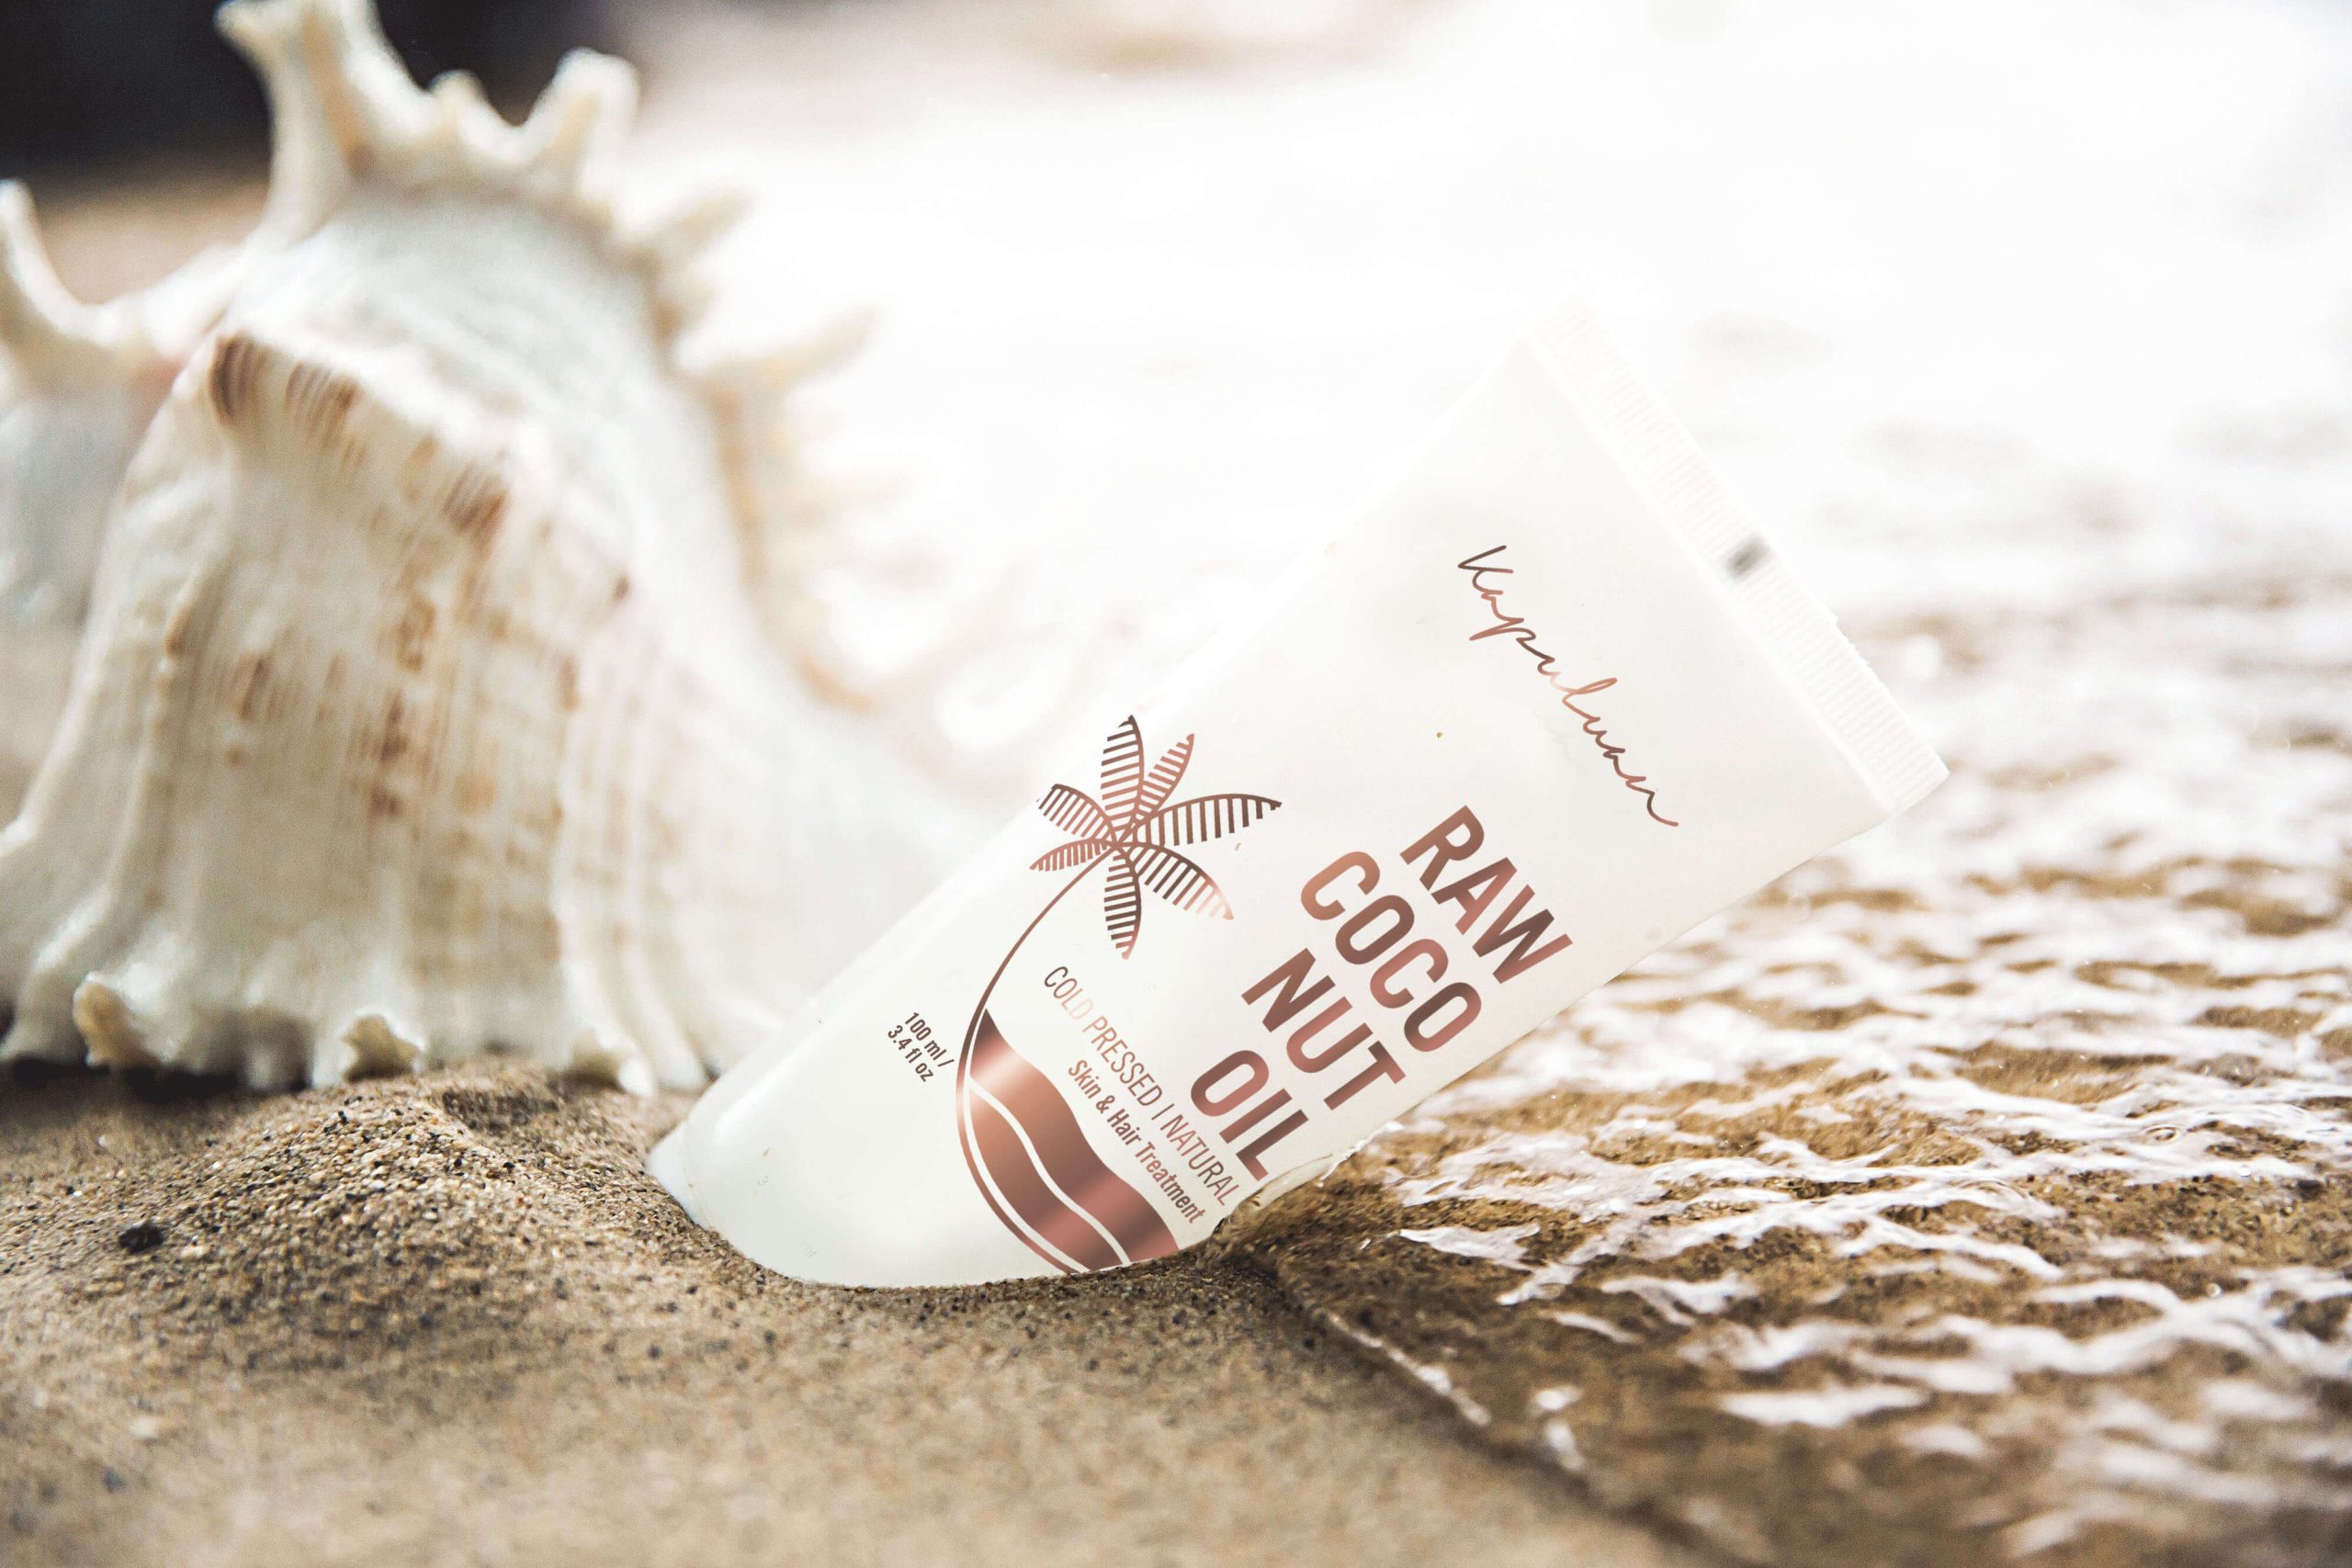 A tube of "raw coconut oil" skincare product lies on a sandy beach next to a large seashell, with gentle ocean waves approaching in the background.